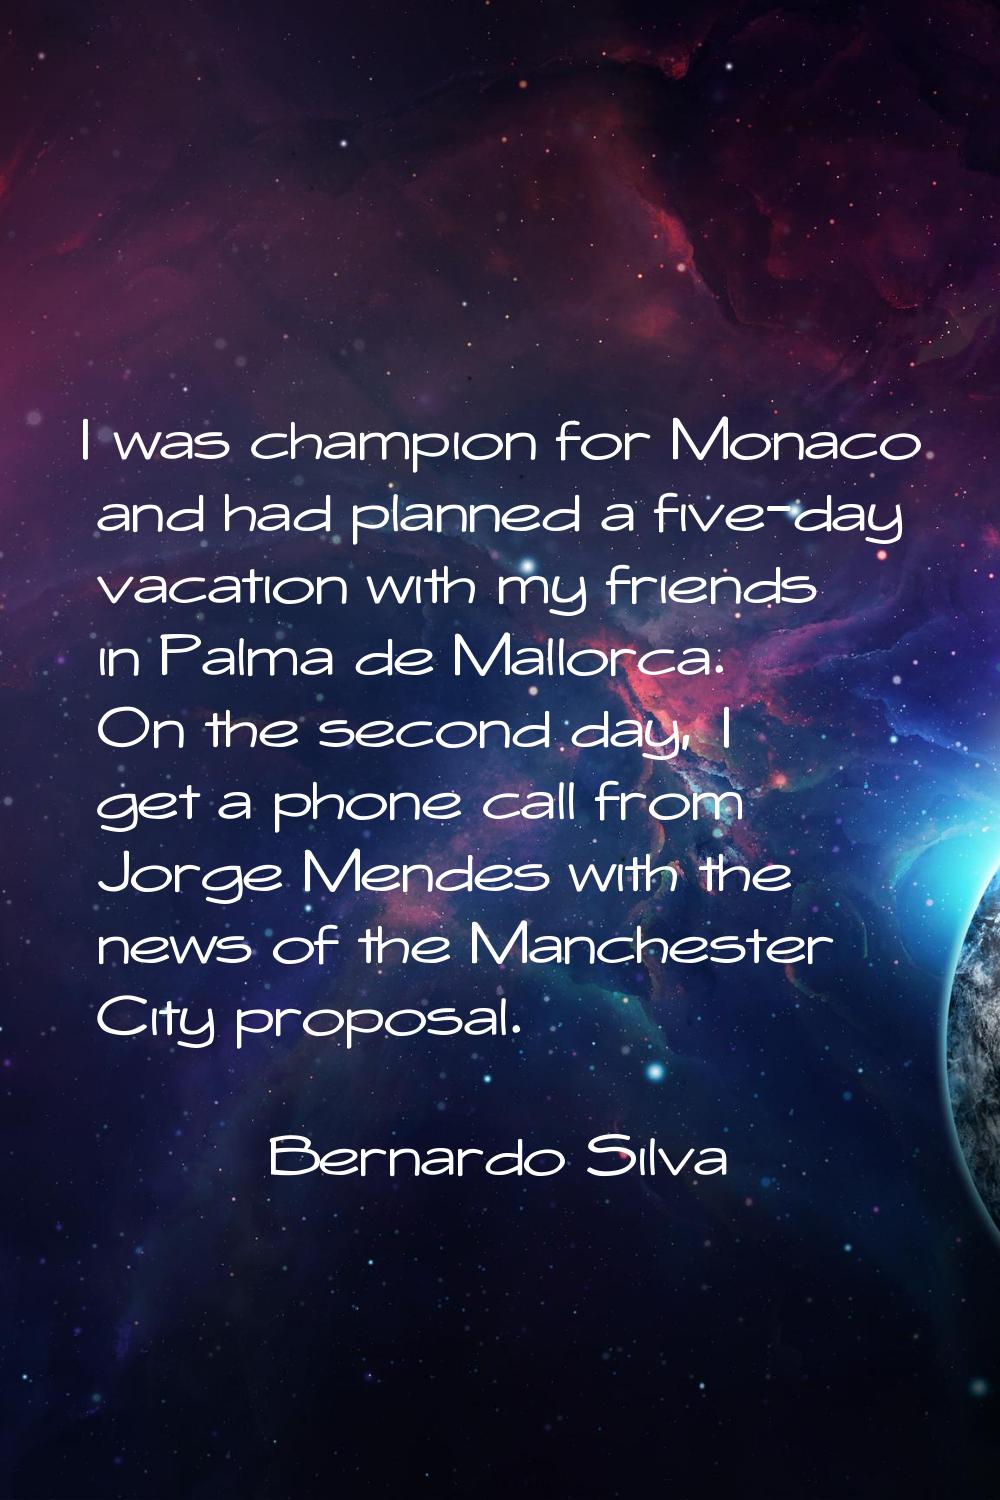 I was champion for Monaco and had planned a five-day vacation with my friends in Palma de Mallorca.